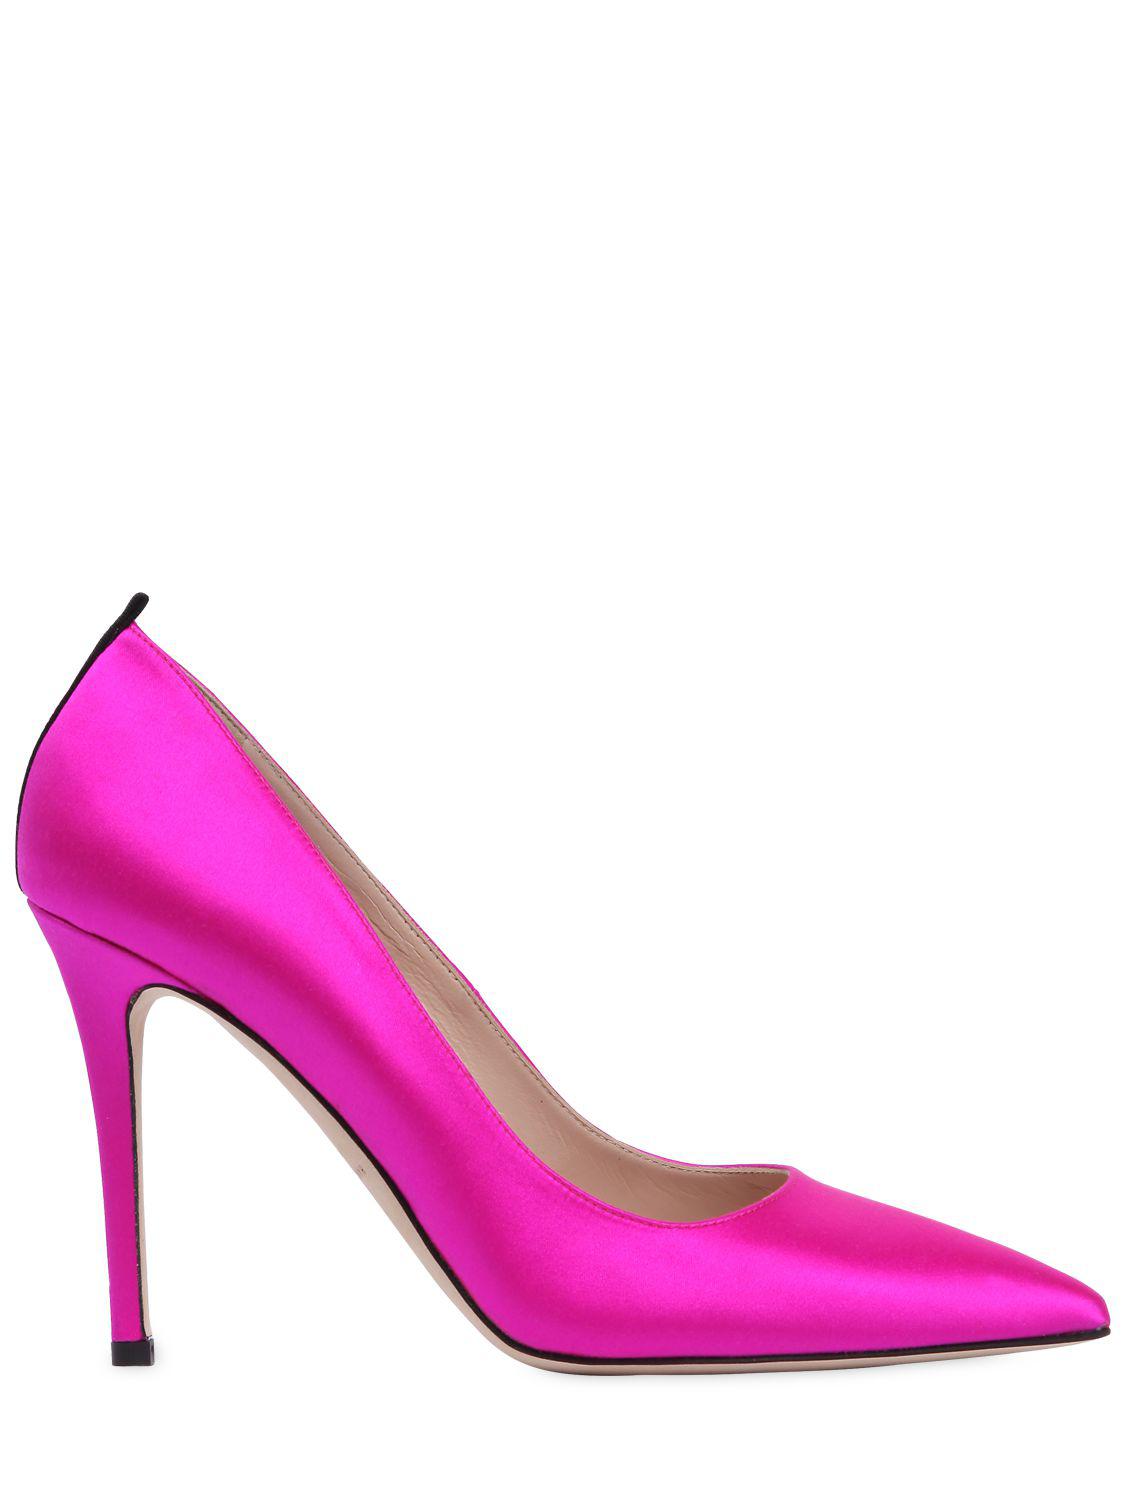 Lyst - Sjp By Sarah Jessica Parker 100mm Fawn Satin Pumps in Pink ...